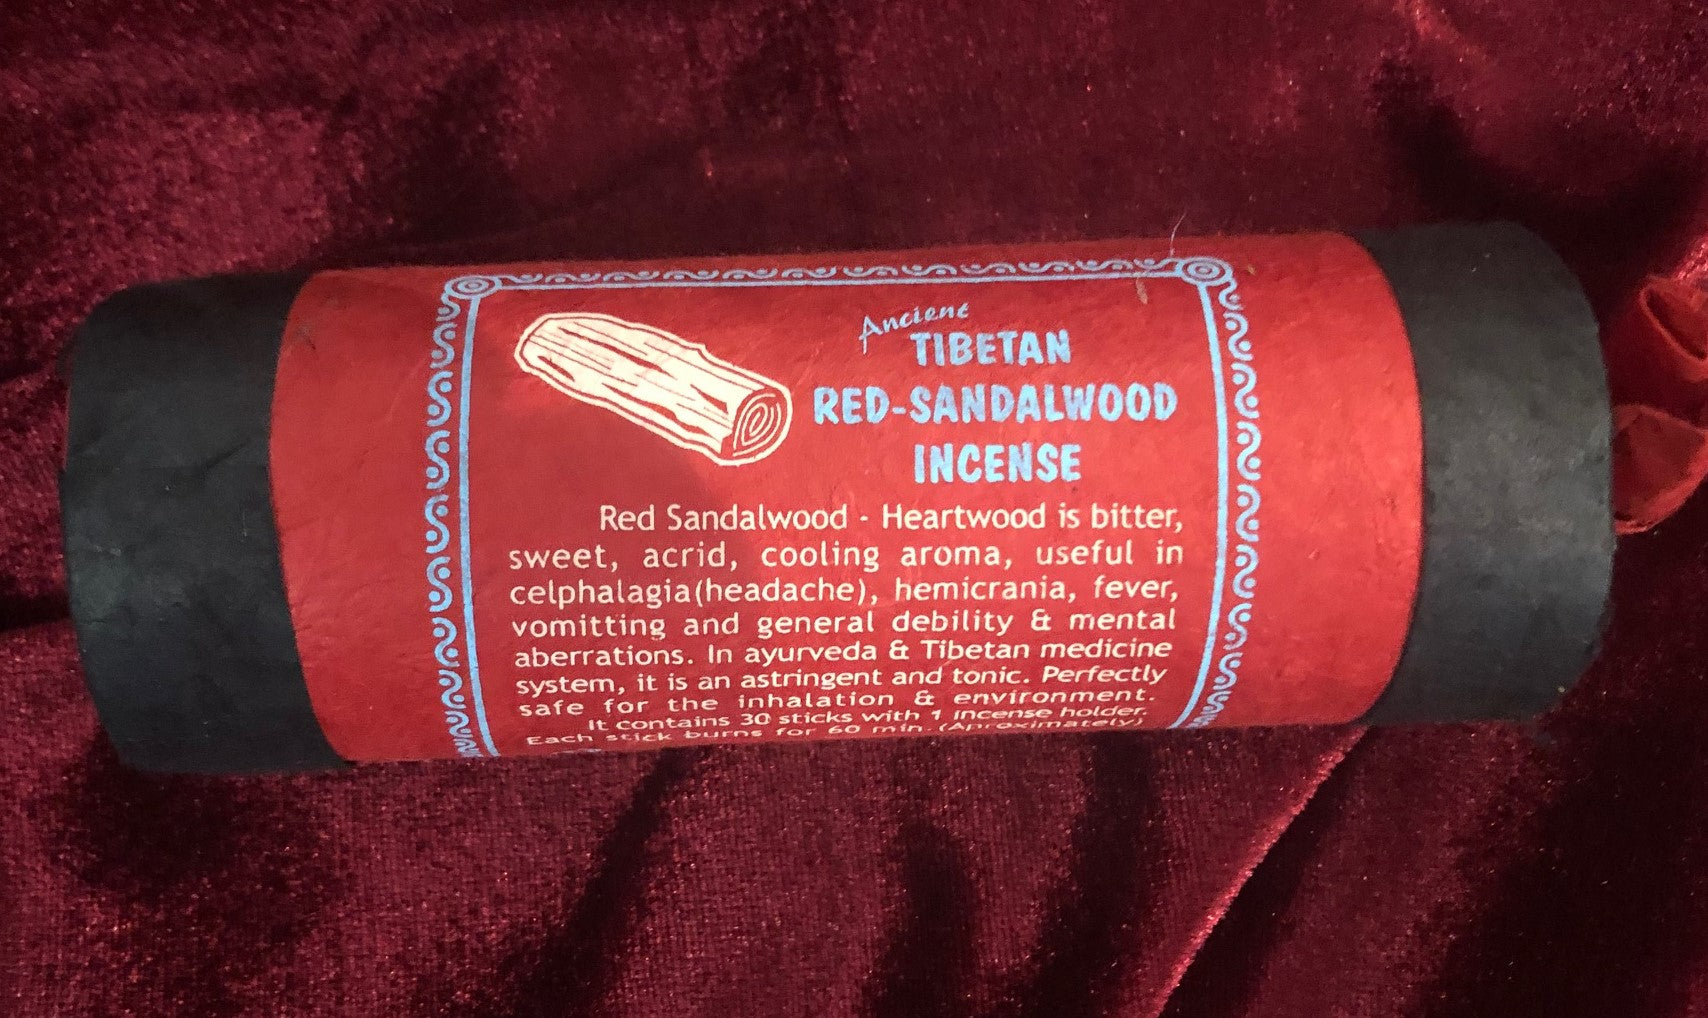 Assorted Fragrances of Tibetan Style Incense from Nepal in a Tube